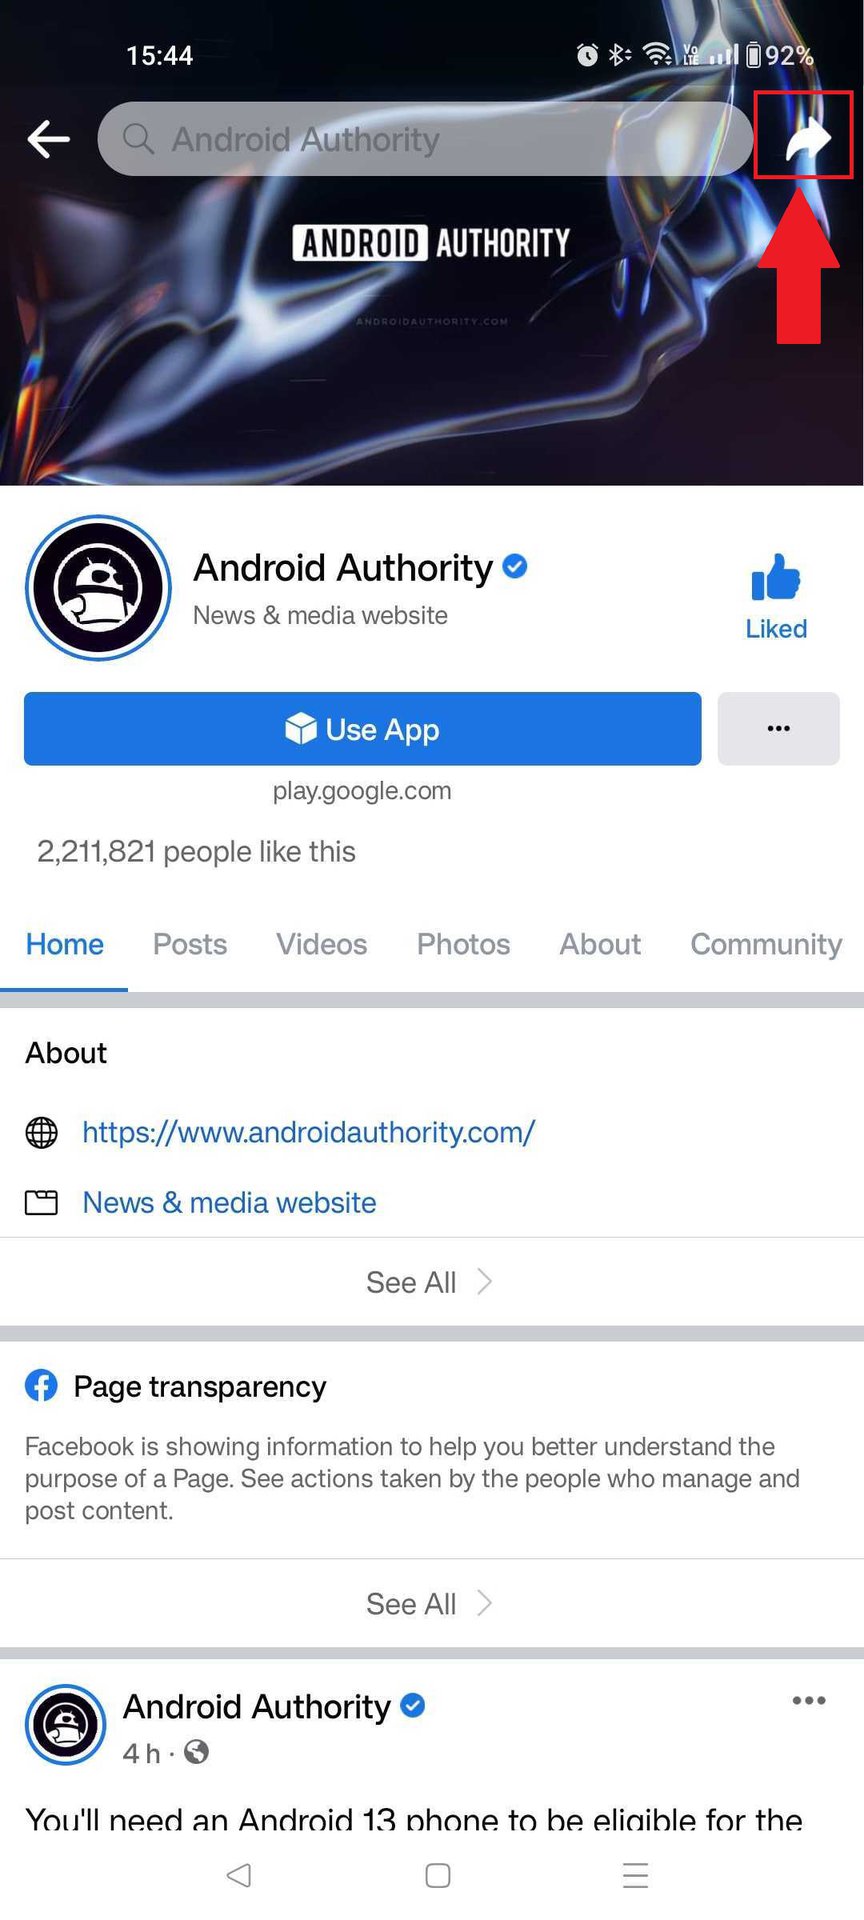 Android Authority Facebook Page